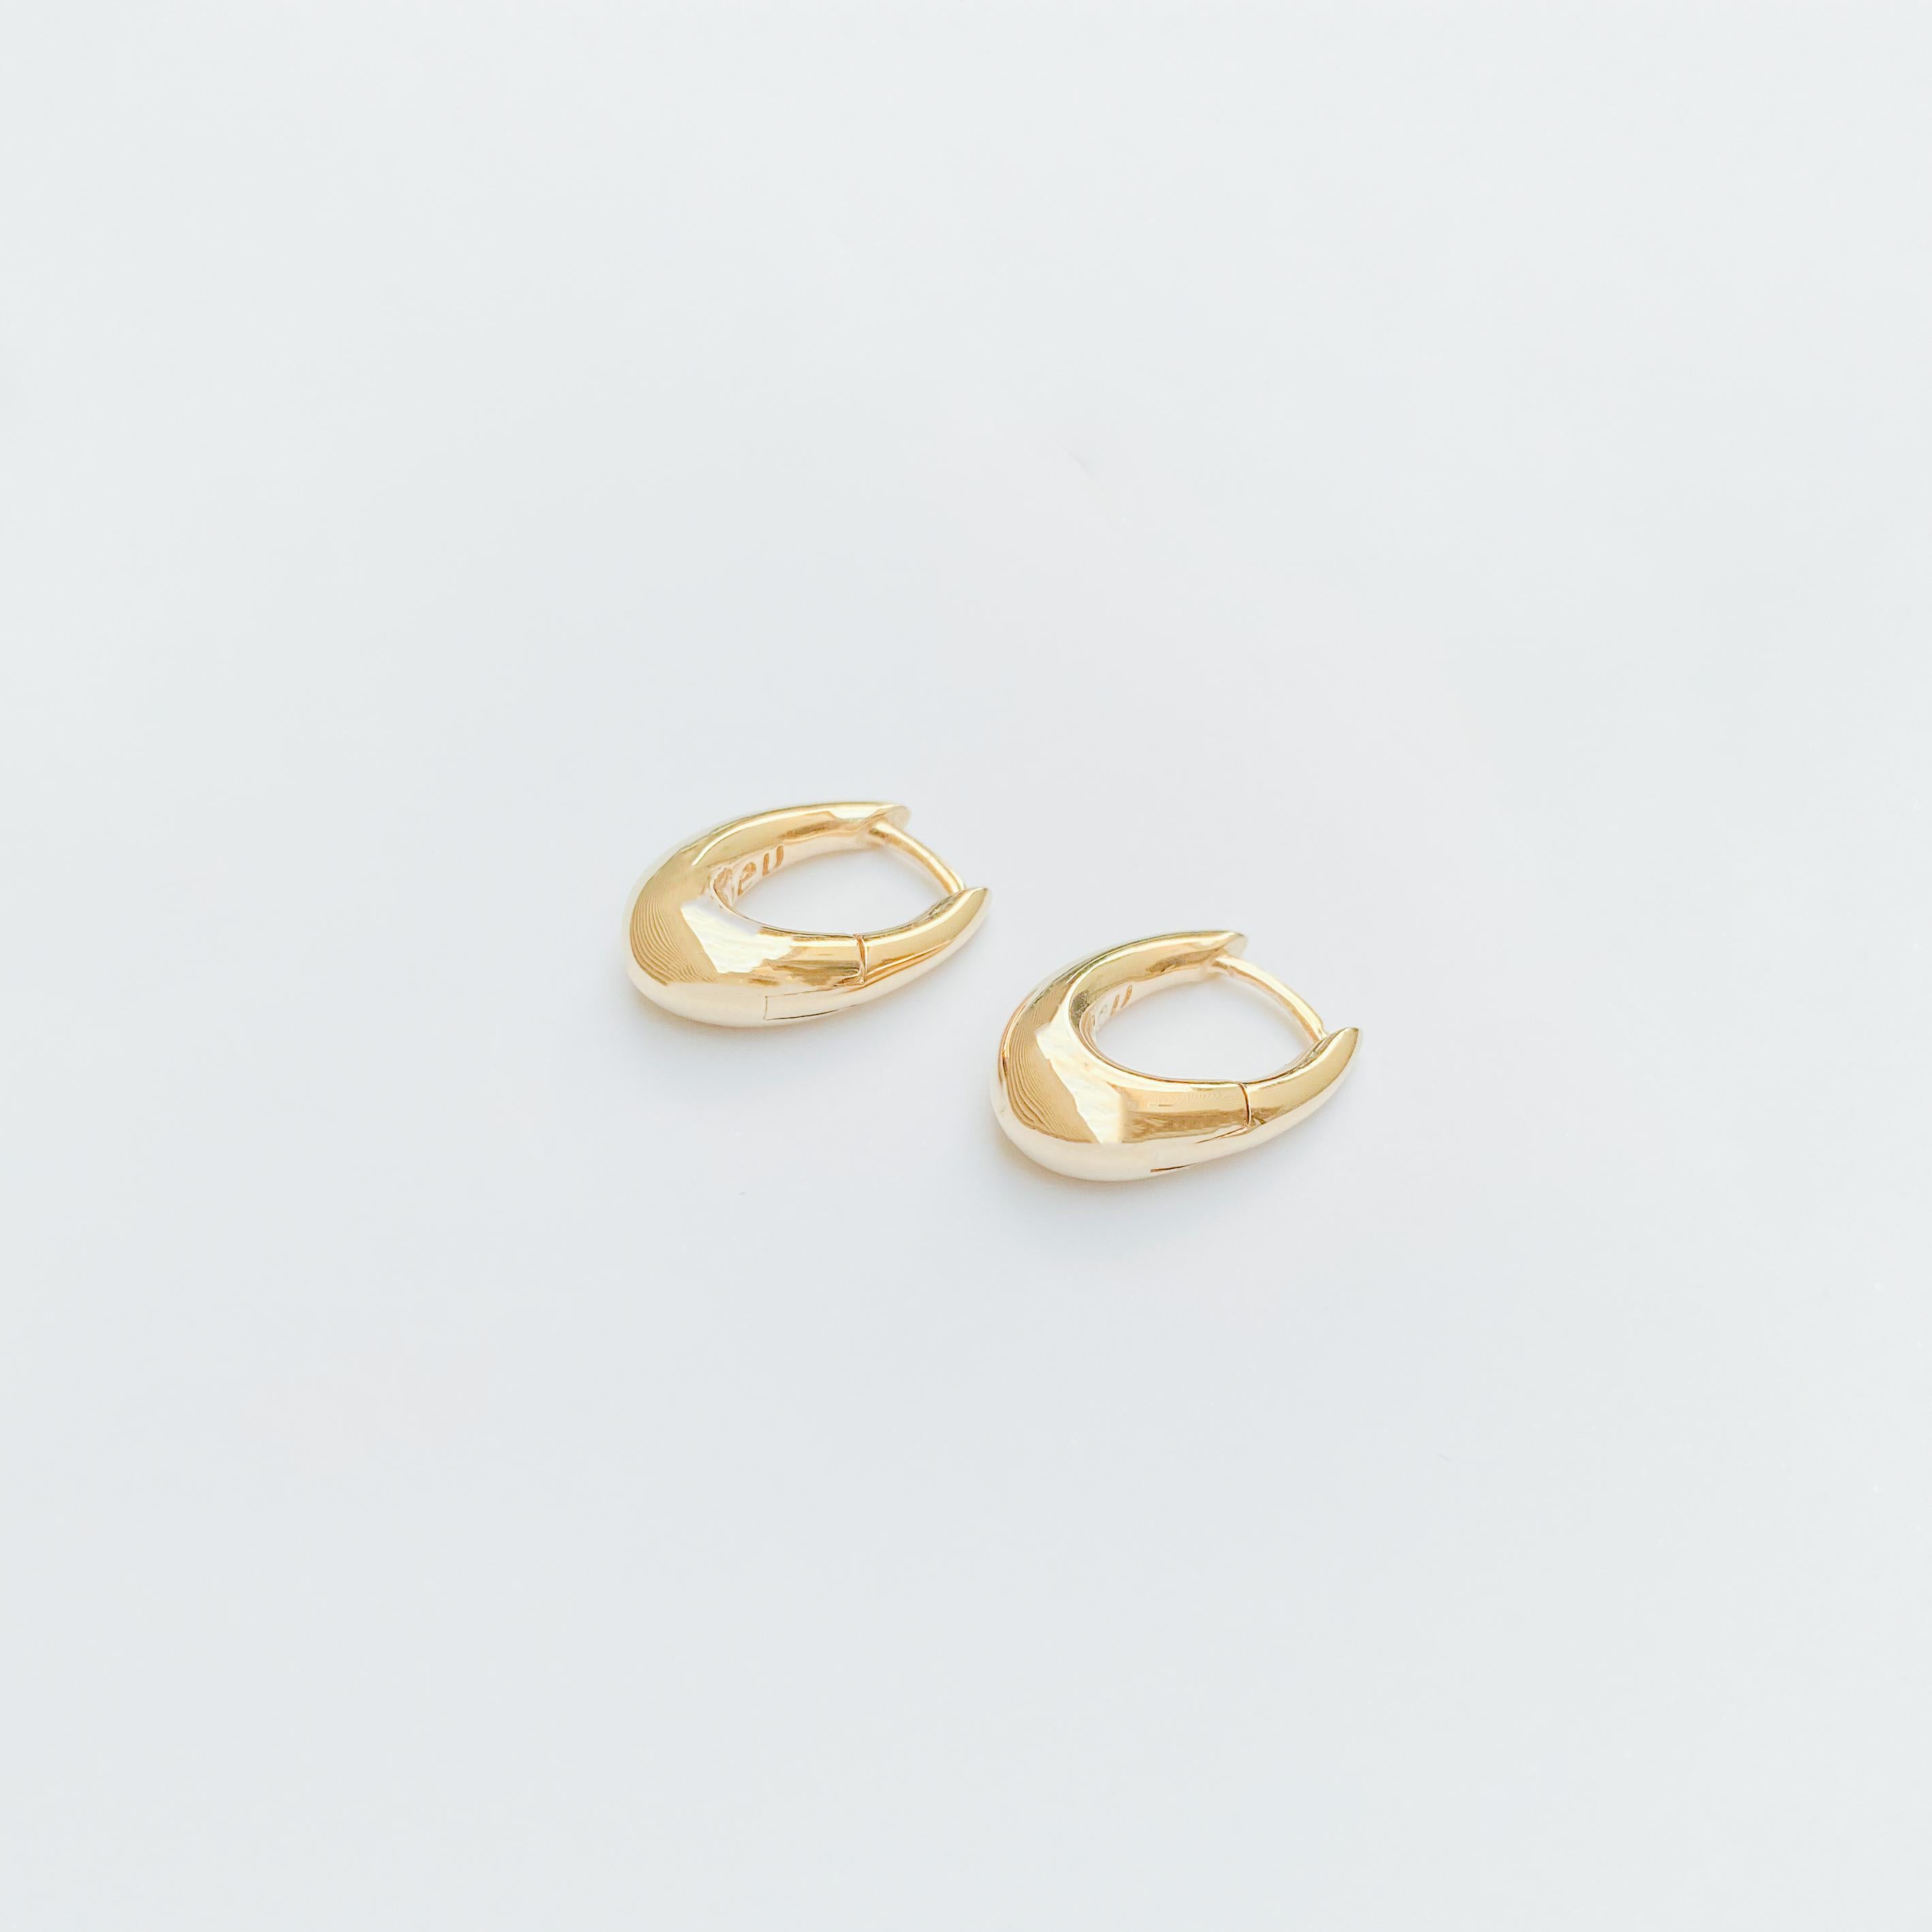 Small egg shaped earring hoops in 14k yellow gold with hidden hinge closure. The size and shape are designed to hug snuggly around the ear lobes. Stackable. Great for daily wear.

2 QTY in stock/ made to order once sold

Designed and Created by Kat